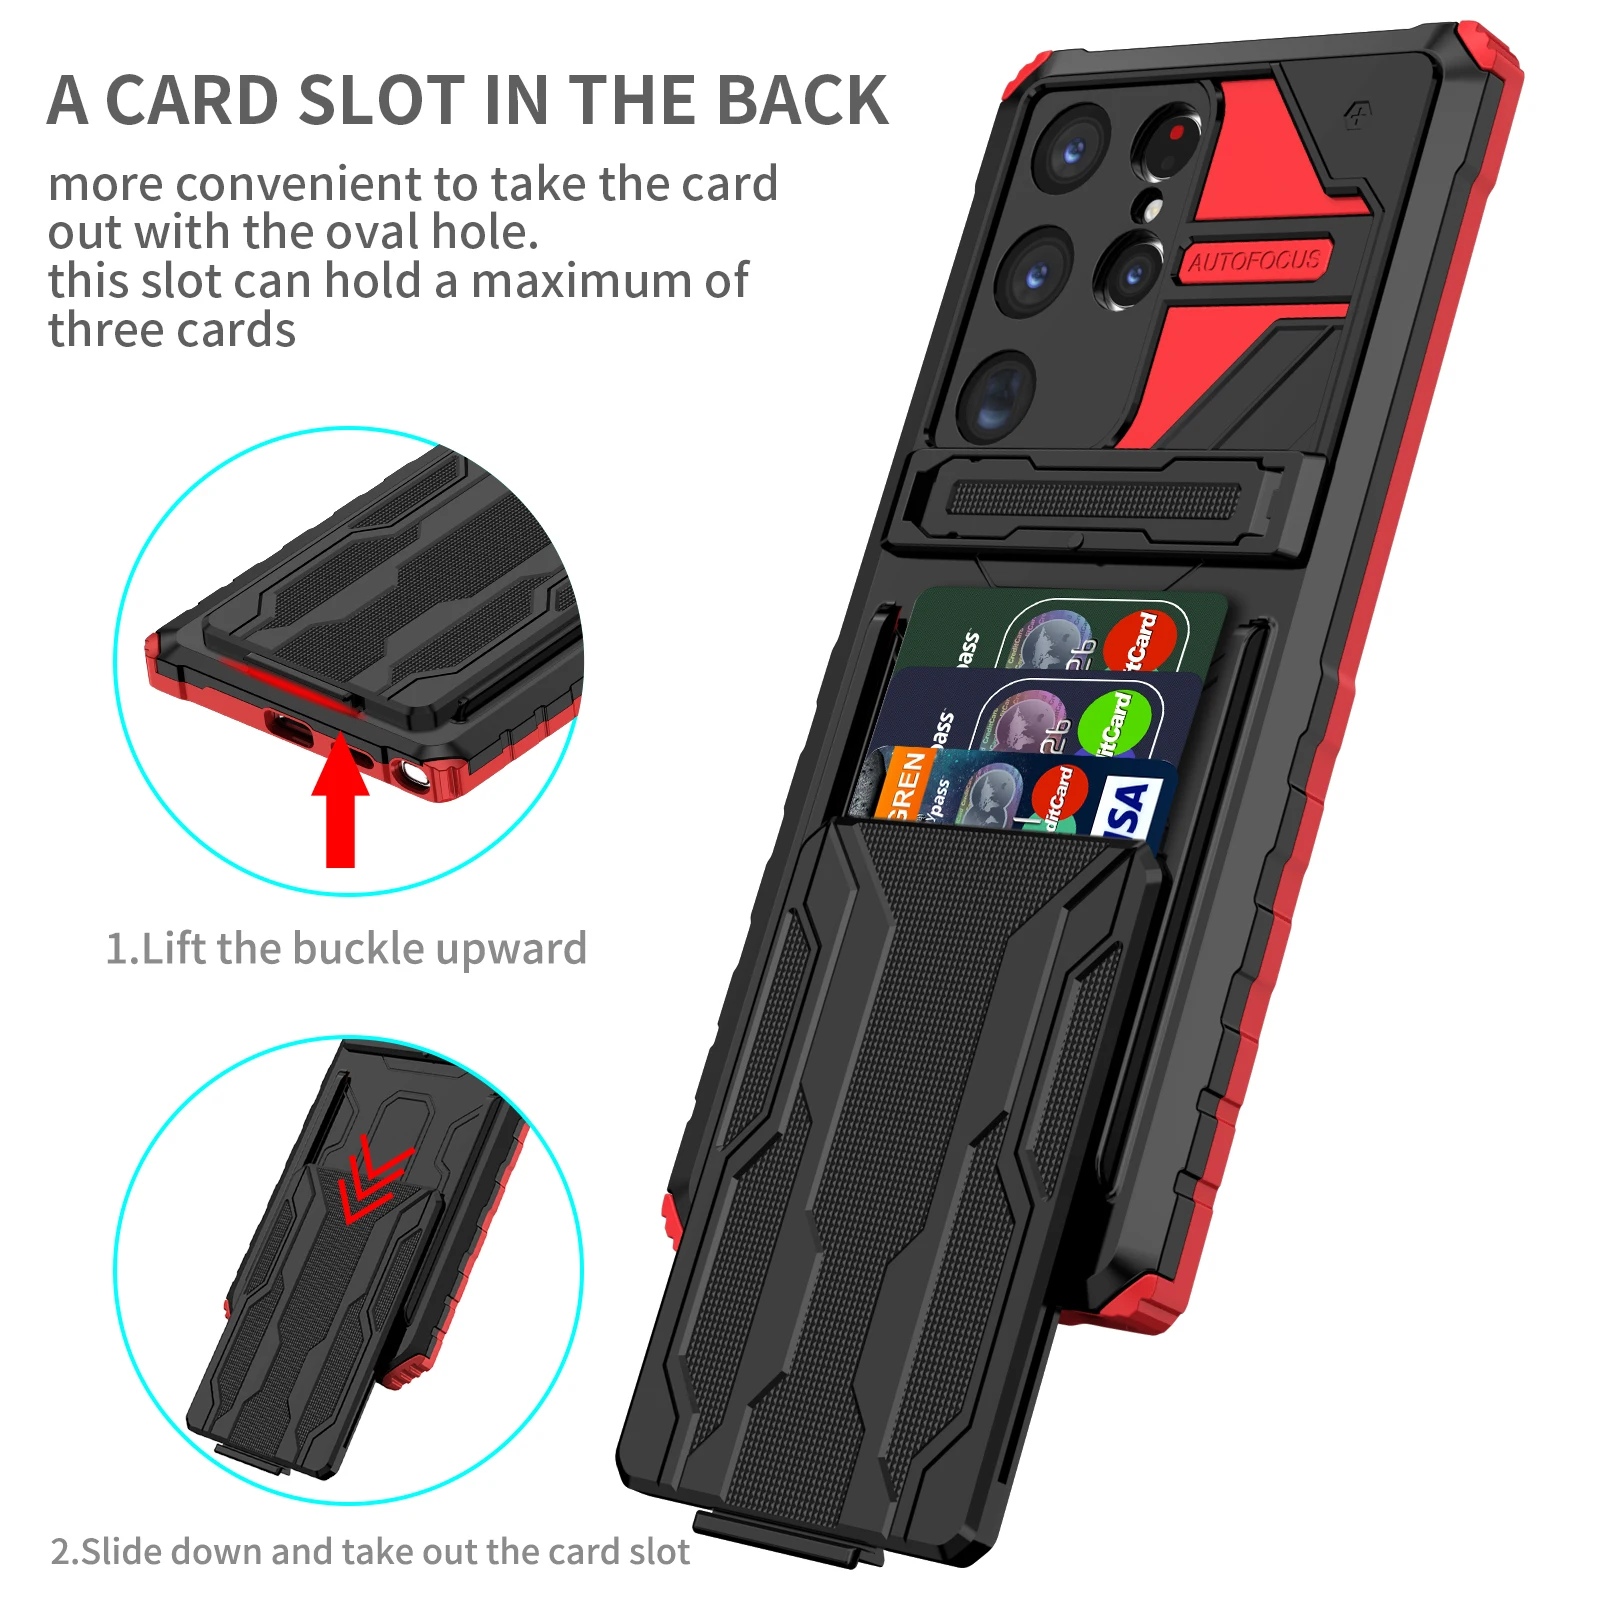 

Case For Samsung S23 S22 S21 Note 20 FE Ultra Plus Wallet With Credit Card Holder Stand Kickstand Slim Rugged Shockproof Cover